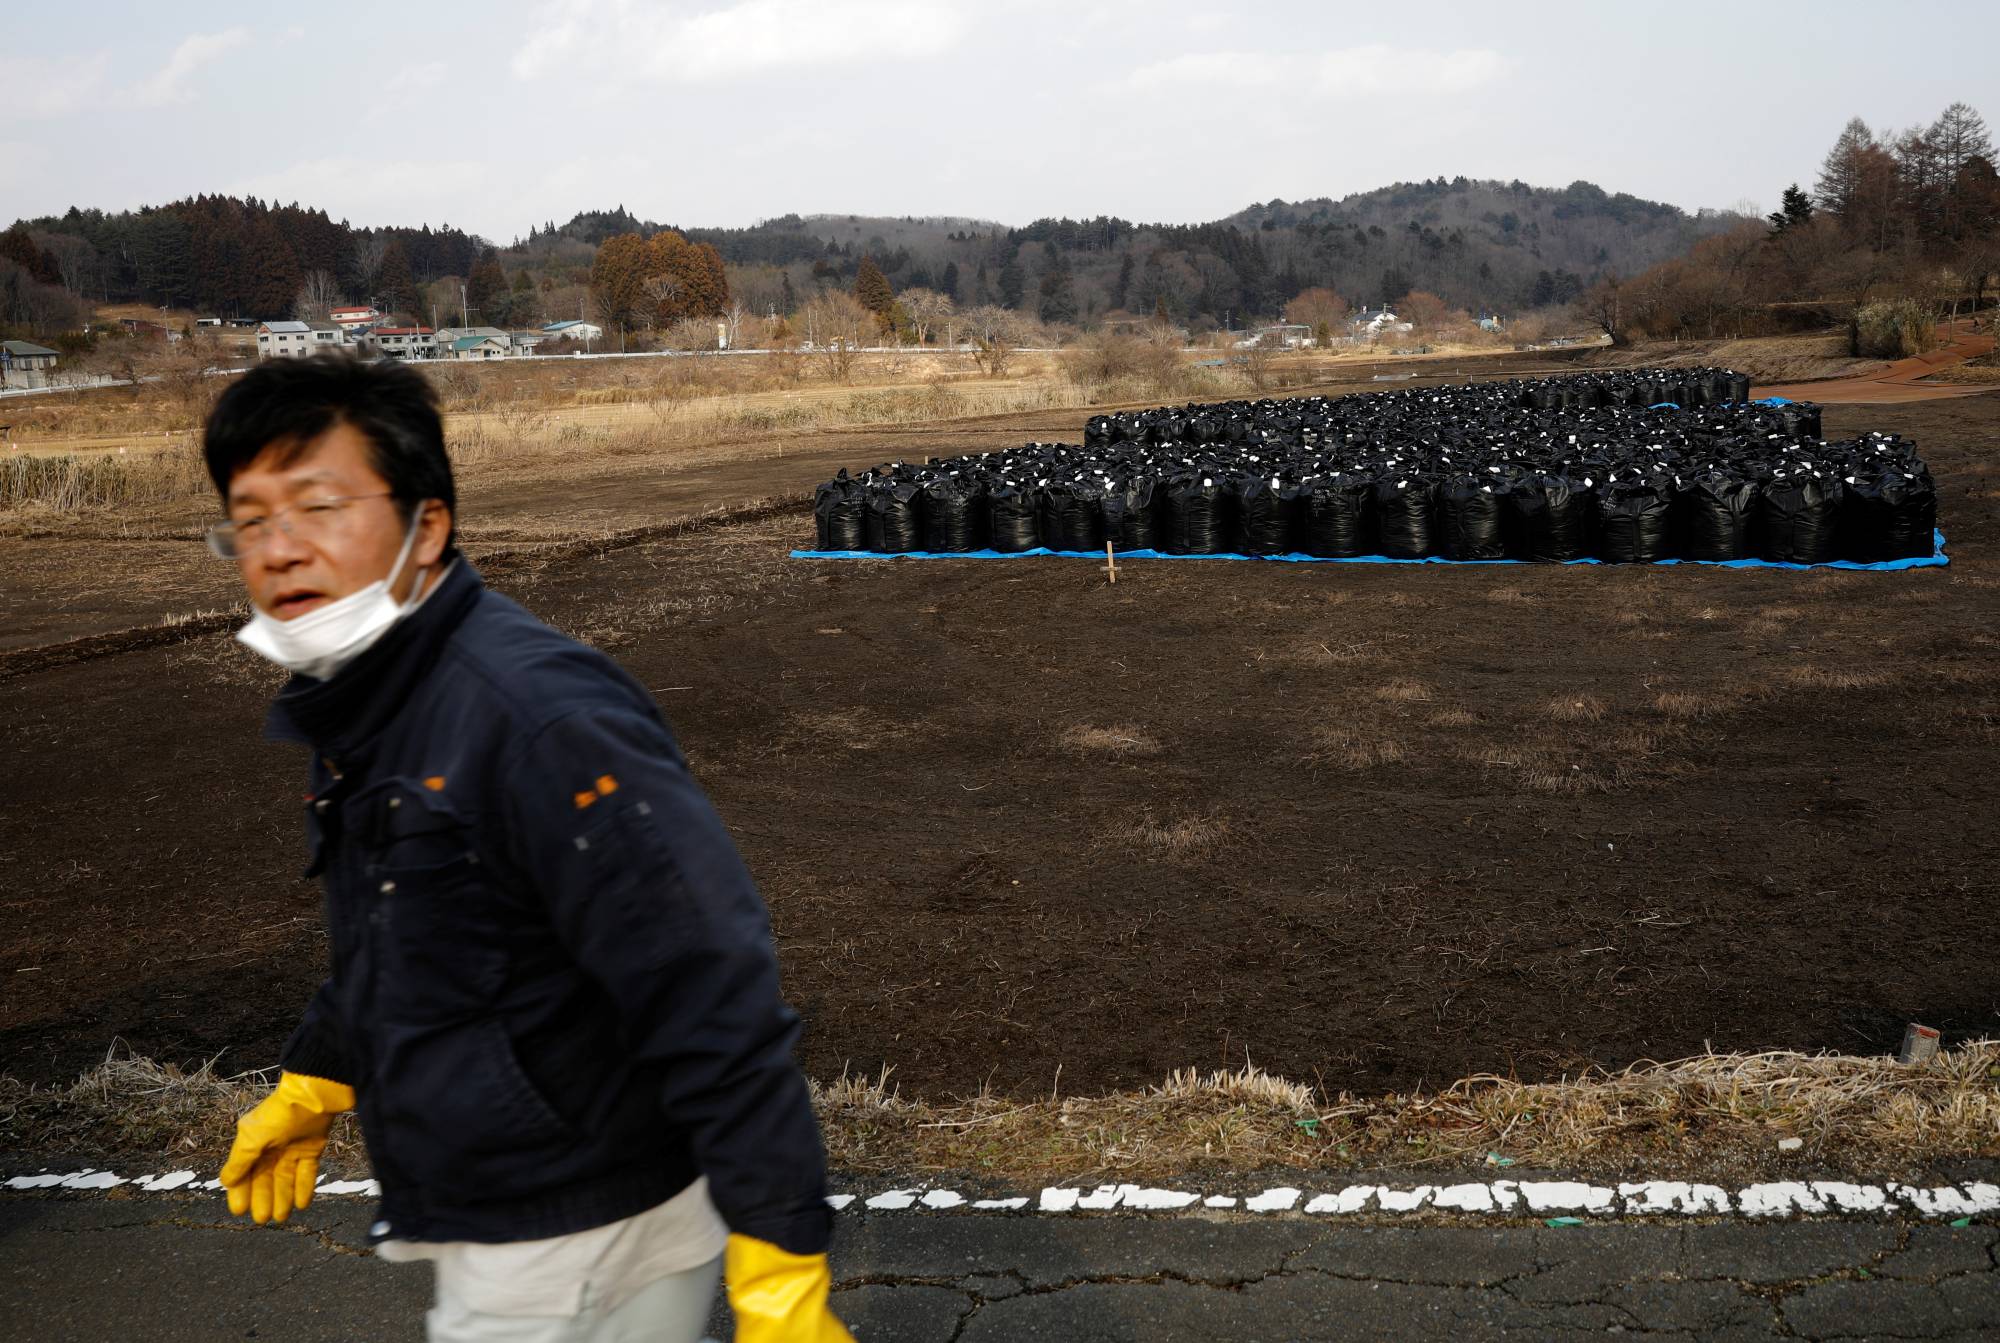 Sakae Kato walks past black bags containing contaminated soil from the fallout of the Fukushima nuclear plant, in a restricted zone in Namie, Fukushima Prefecture, on Feb. 21. | REUTERS